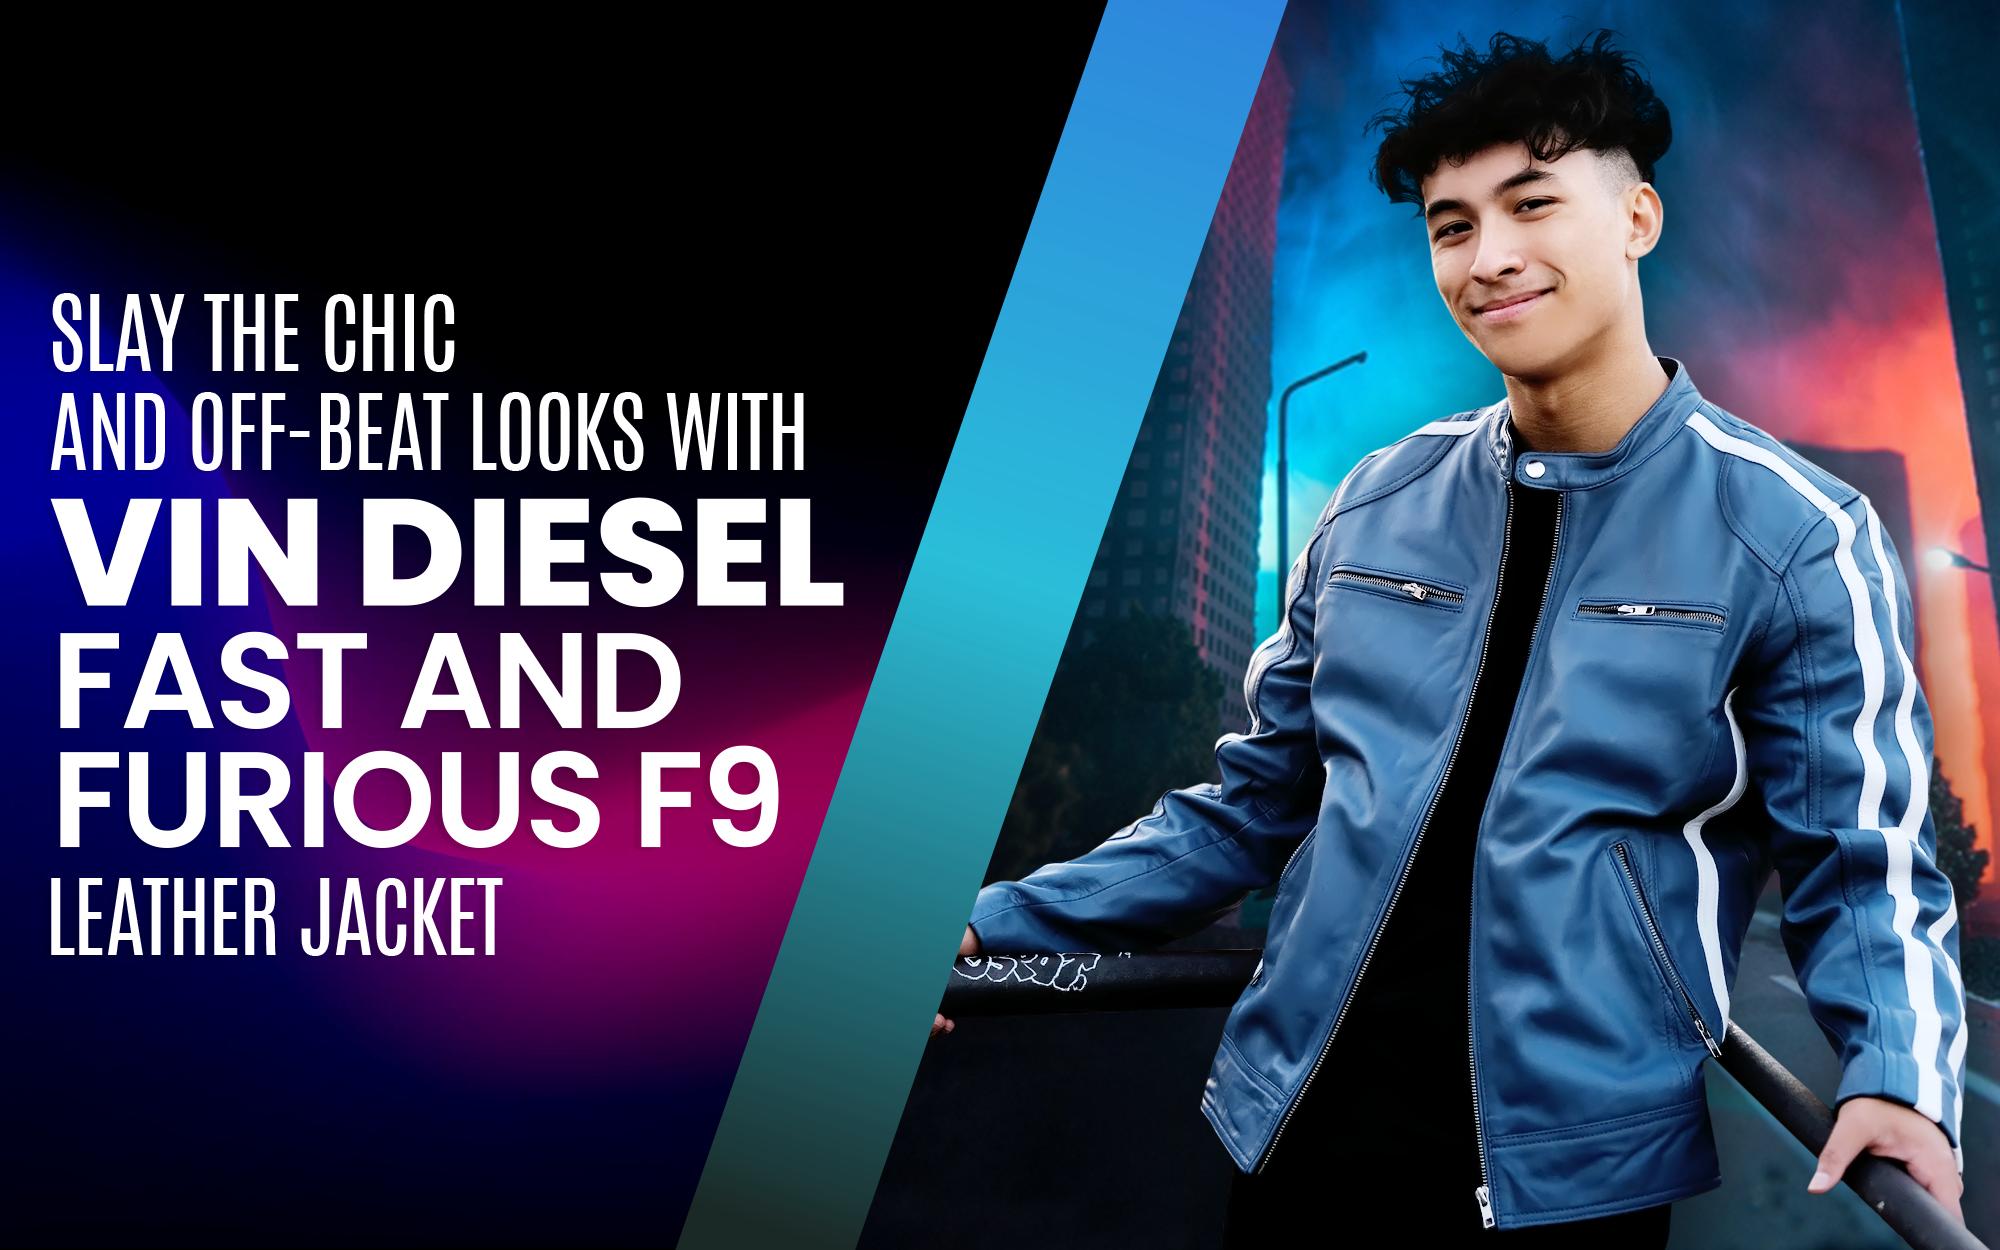 Slay the Chic and Off-Beat Looks With Vin Diesel Fast and Furious F9 Leather Jacket